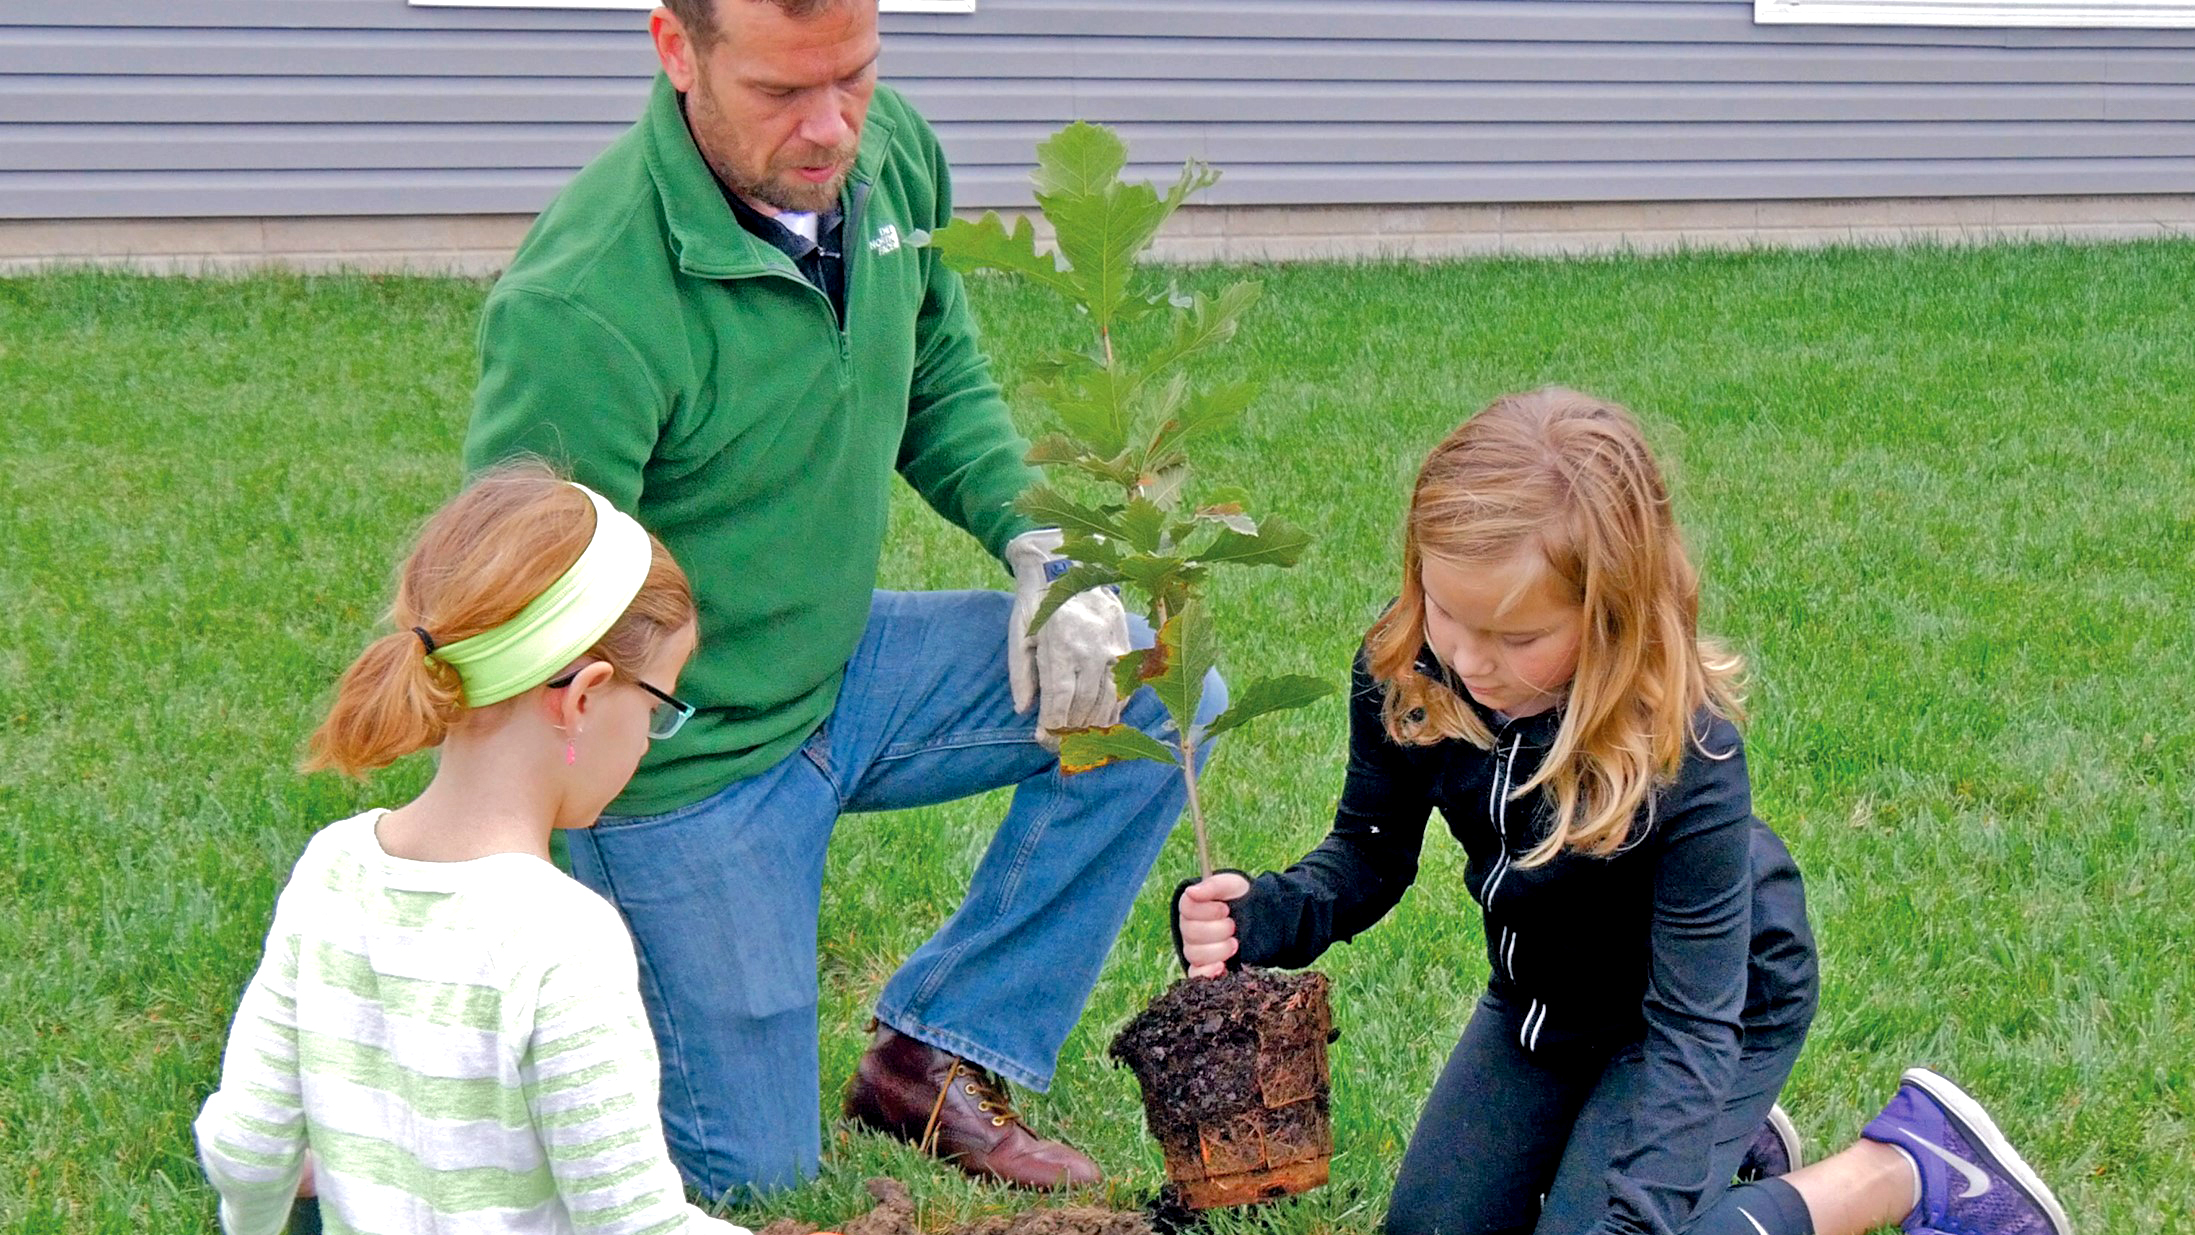 Entergy Arkansas in partnership with the Arbor Day Foundation’s Energy-Saving Trees program has given away nearly 1,000 trees to help lower homeowners’ energy costs and protect the environment. (photo courtesy of the Arbor Day Foundation)